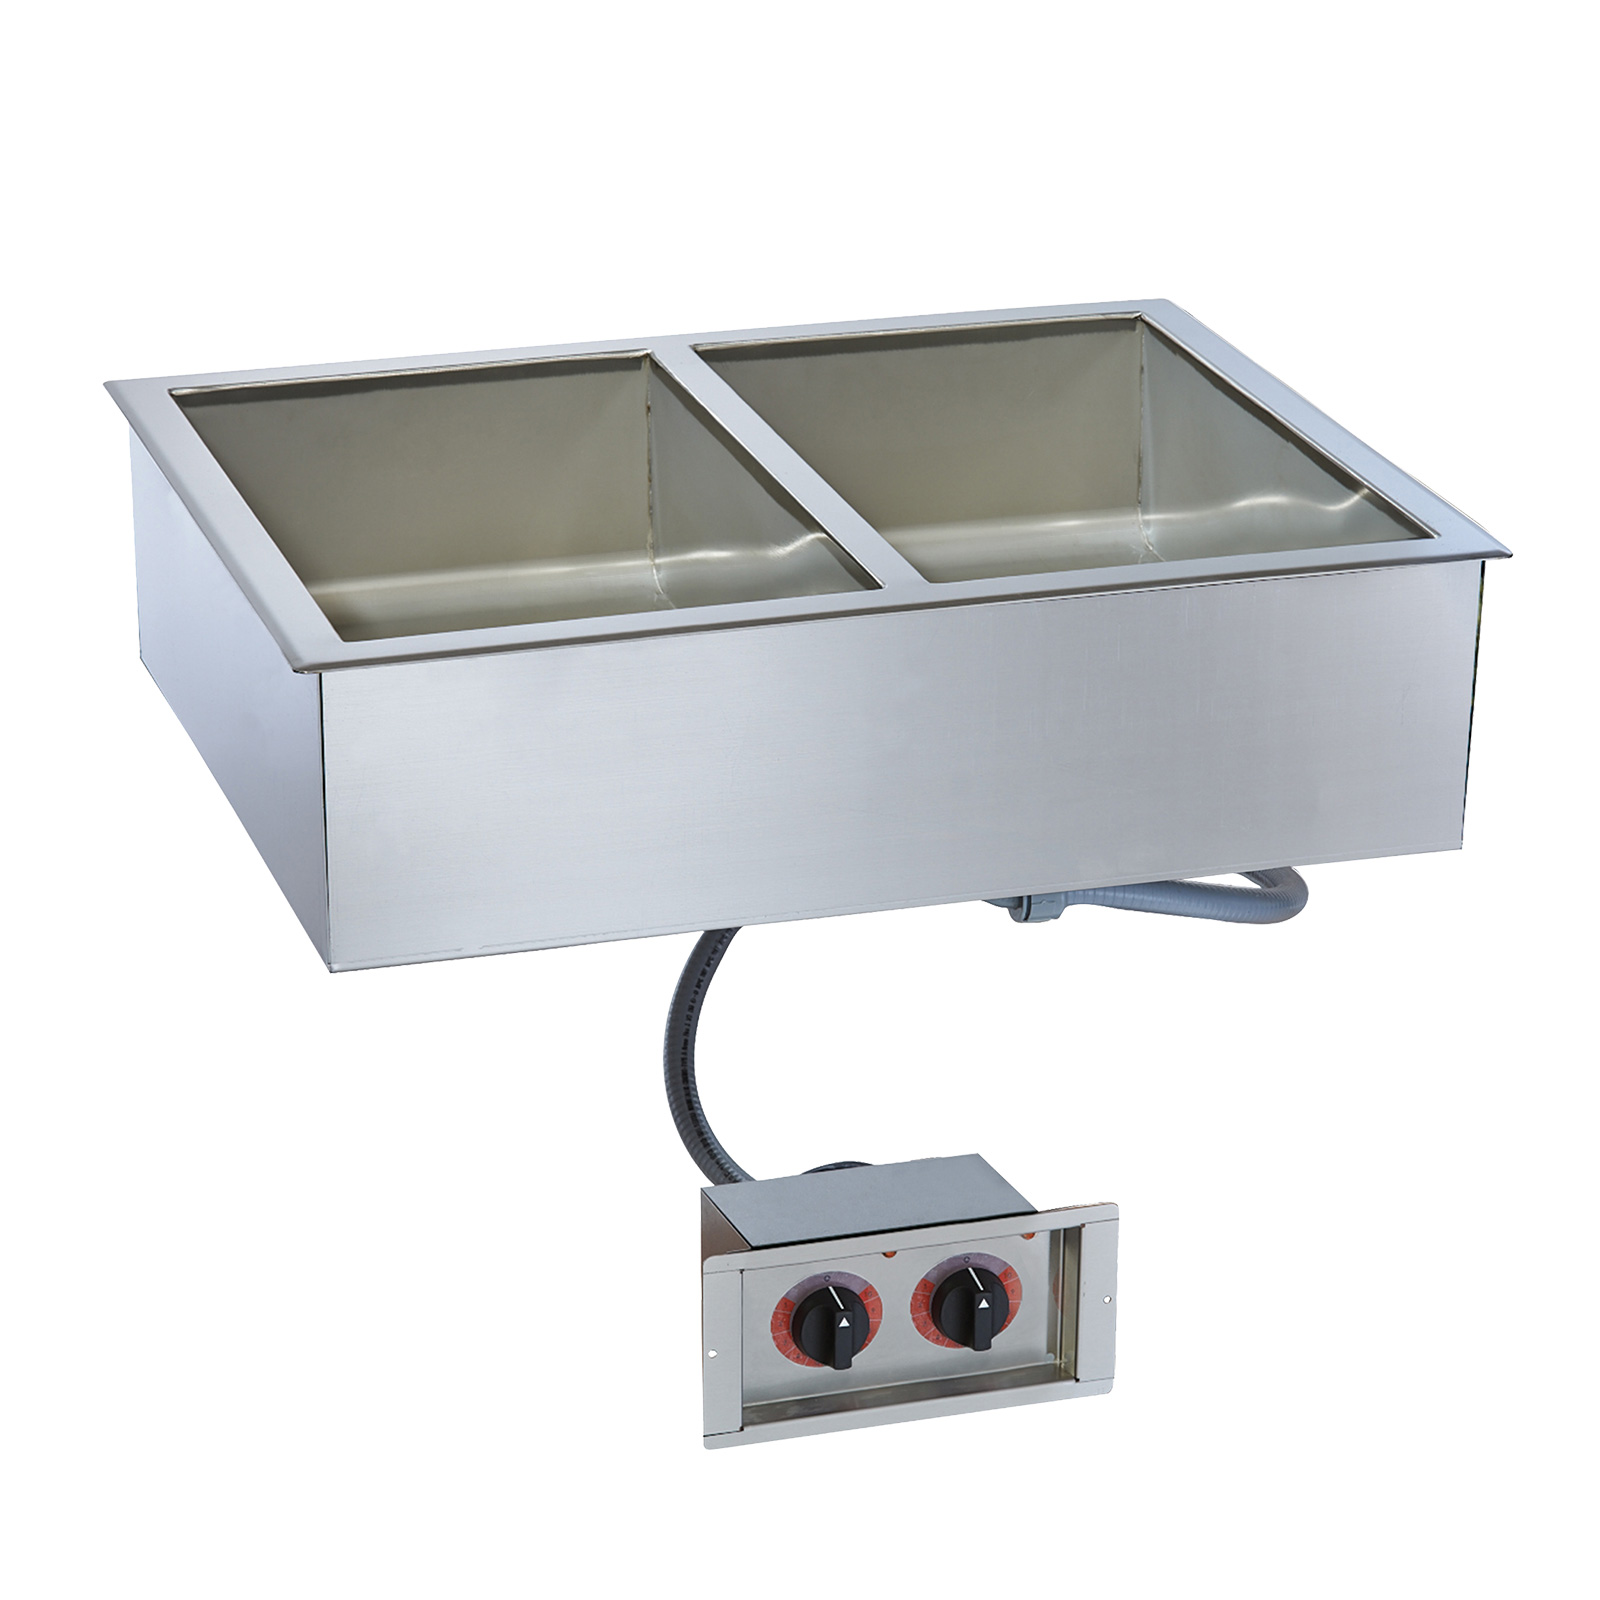 Alto-Shaam 200-HWI/D4 Hot Food Well Unit, Drop-In, Electric